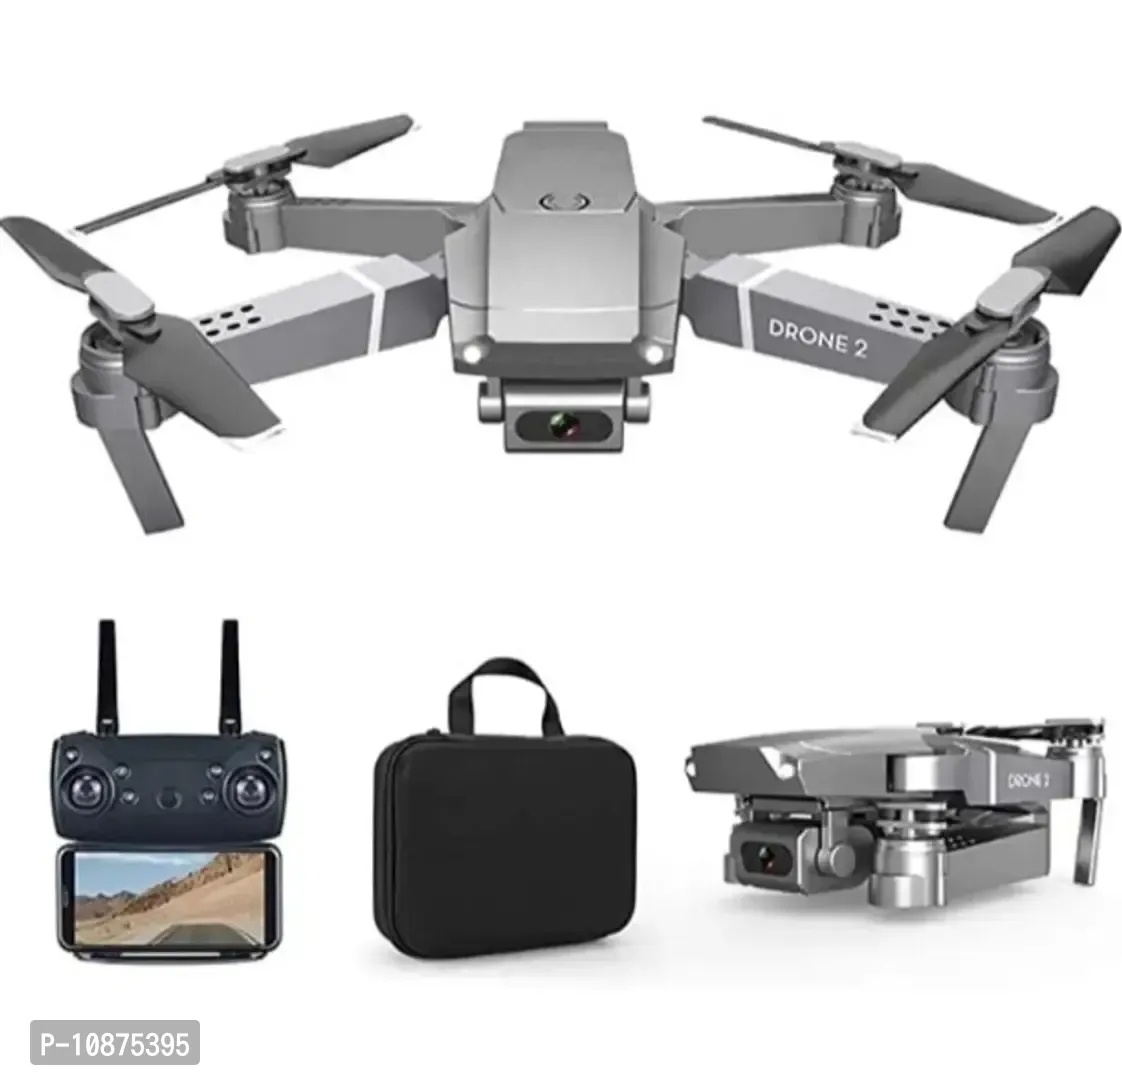 Foldable Remote Control Drone with 1600mAh Battery, HD Wide Angle Lens, and Optical Flow Positioning Camera